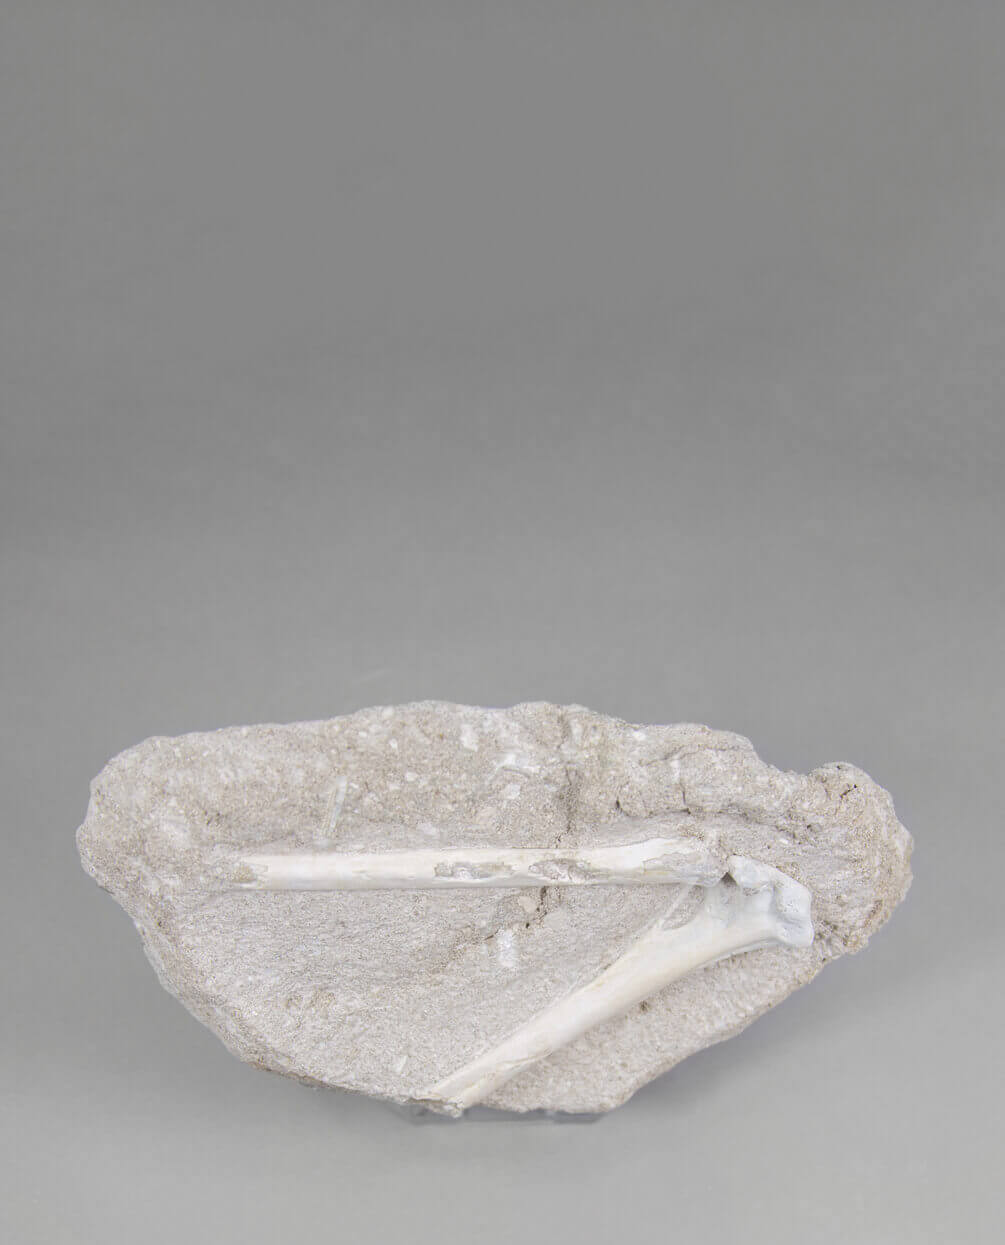 A museum-standard rare fossil Odontopteryx gigas bird bone for sale measuring 230mm at THE FOSSIL STORE